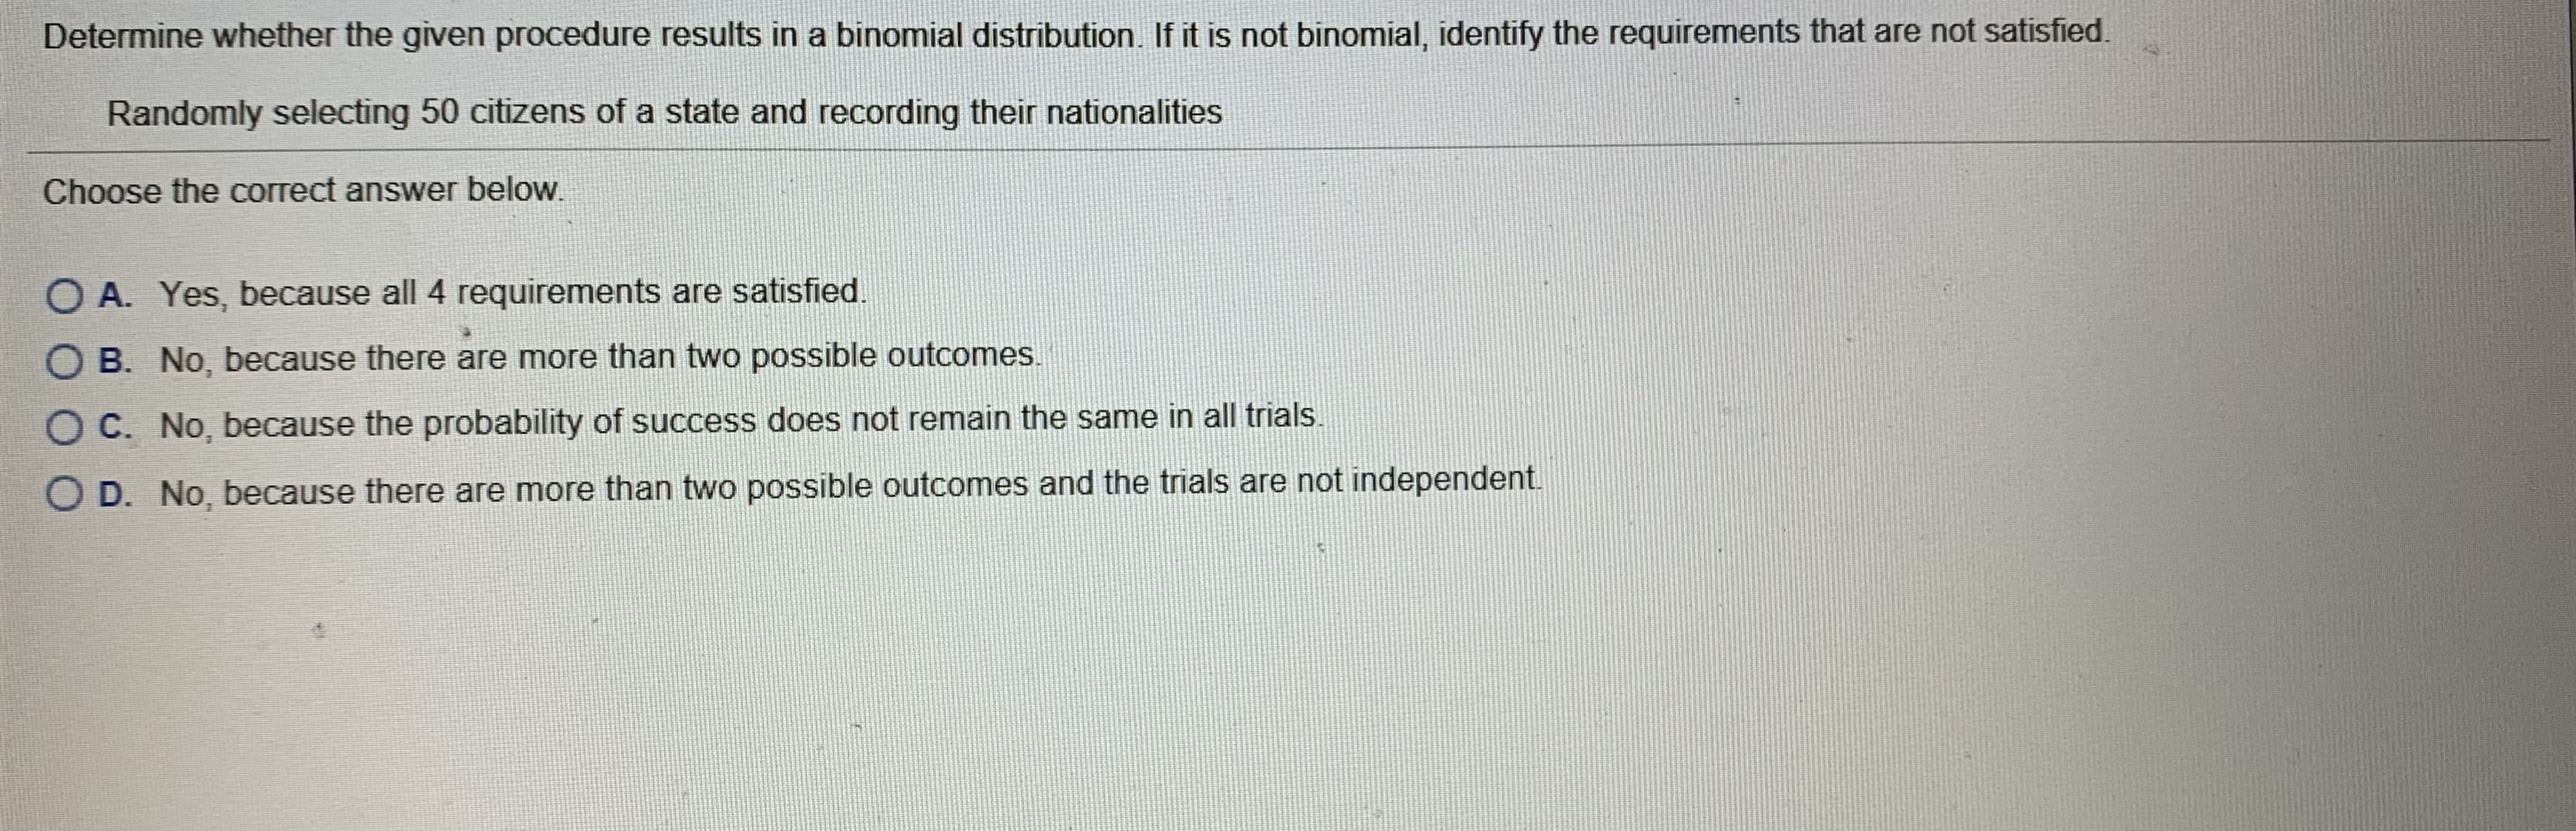 Determine whether the given procedure results in a binomial distribution. If it is not binomial, identify the requirements that are not satisfied.
Randomly selecting 50 citizens of a state and recording their nationalities
Choose the correct answer below.
O A. Yes, because all 4 requirements are satisfied.
O B. No, because there are more than two possible outcomes.
O C. No, because the probability of success does not remain the same in all trials.
O D. No, because there are more than two possible outcomes and the trials are not independent.
